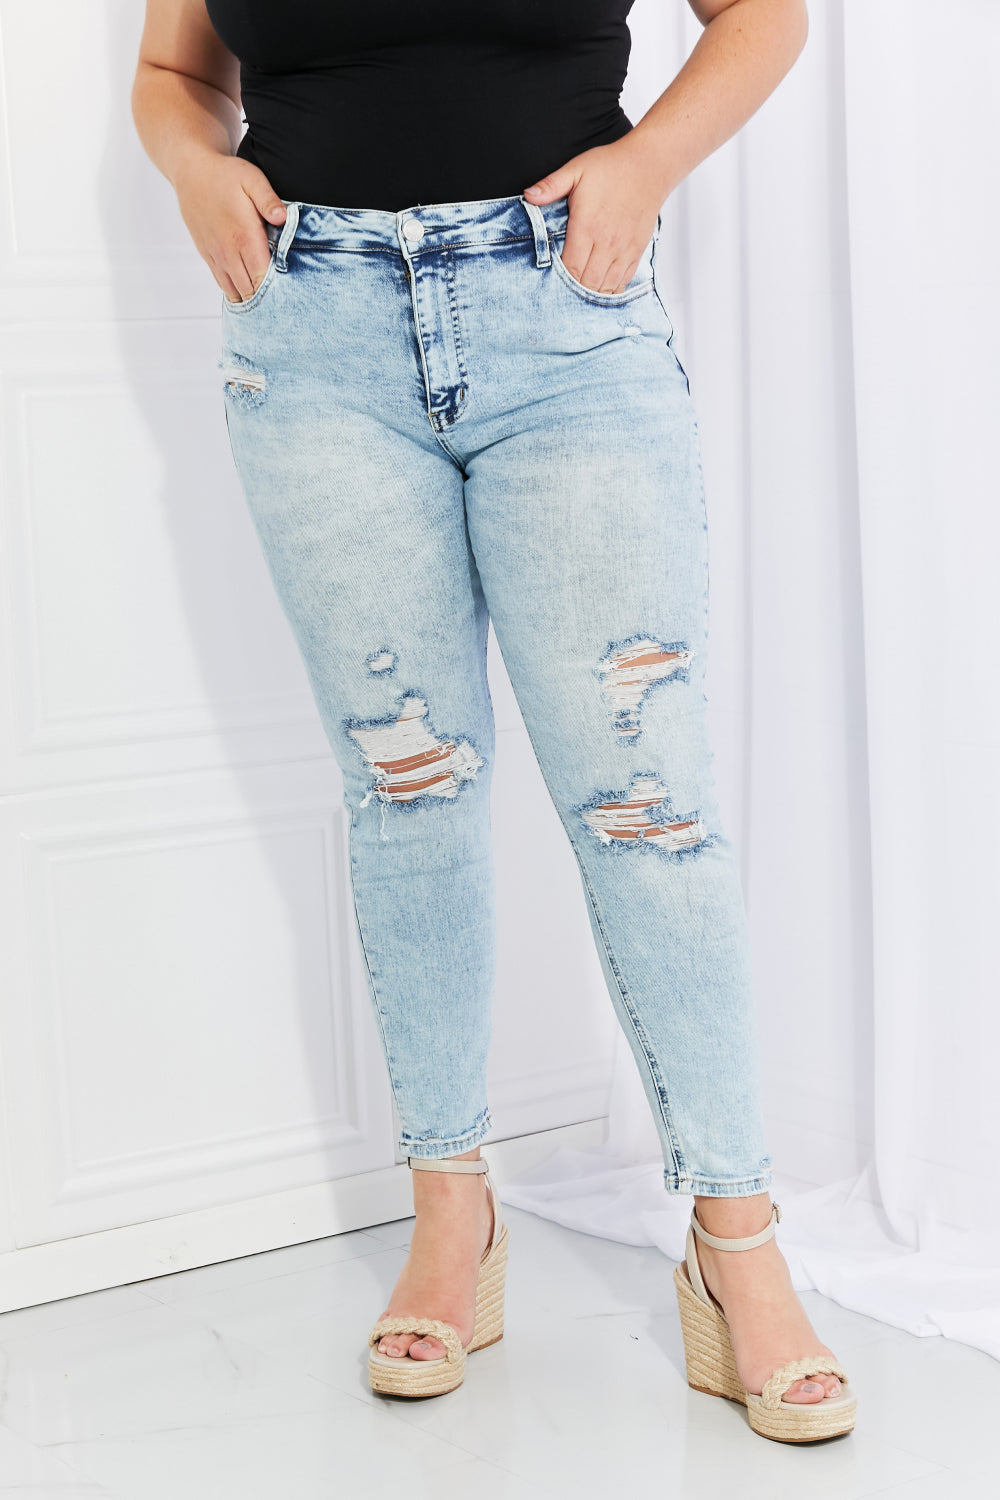 Regular And Plus Size Distressed Jeans by Vervet